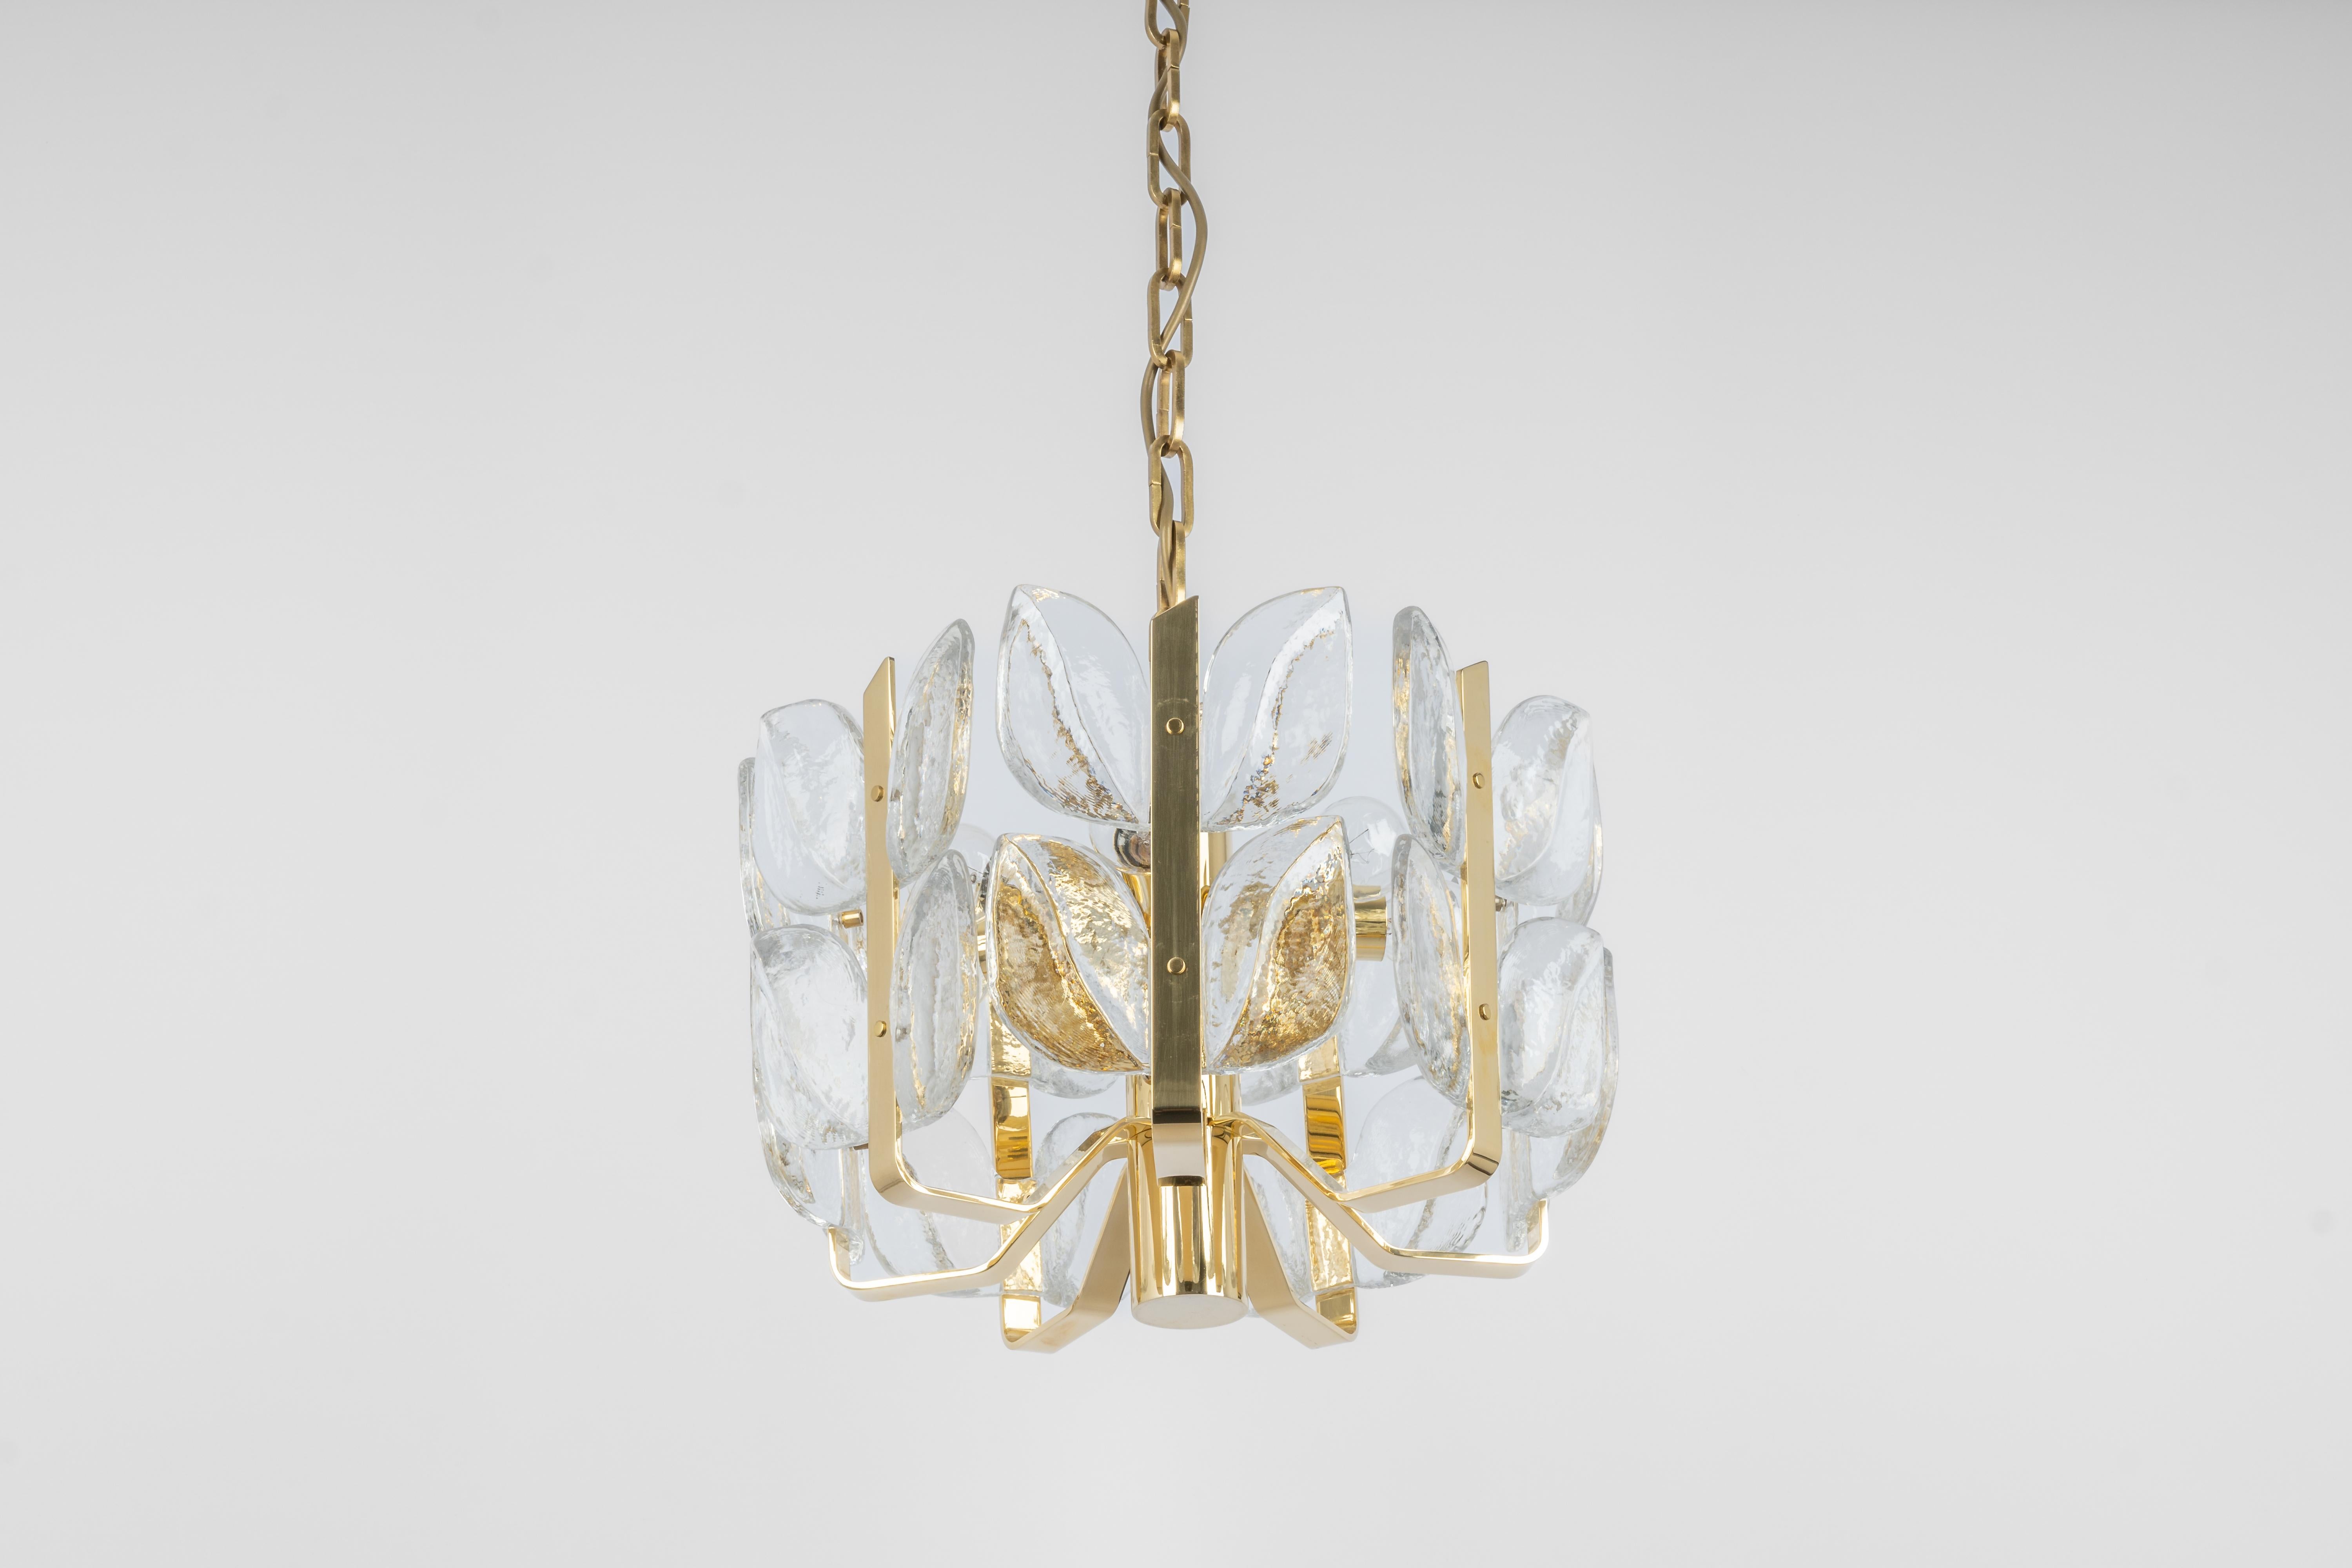 Wonderful gilt brass chandelier made by Kalmar (Serie: Florida), Austria, manufactured, circa 1970-1979.
Great structure gathering many structured glasses in leaves form, beautifully refracting the light very high quality.

High quality and in very